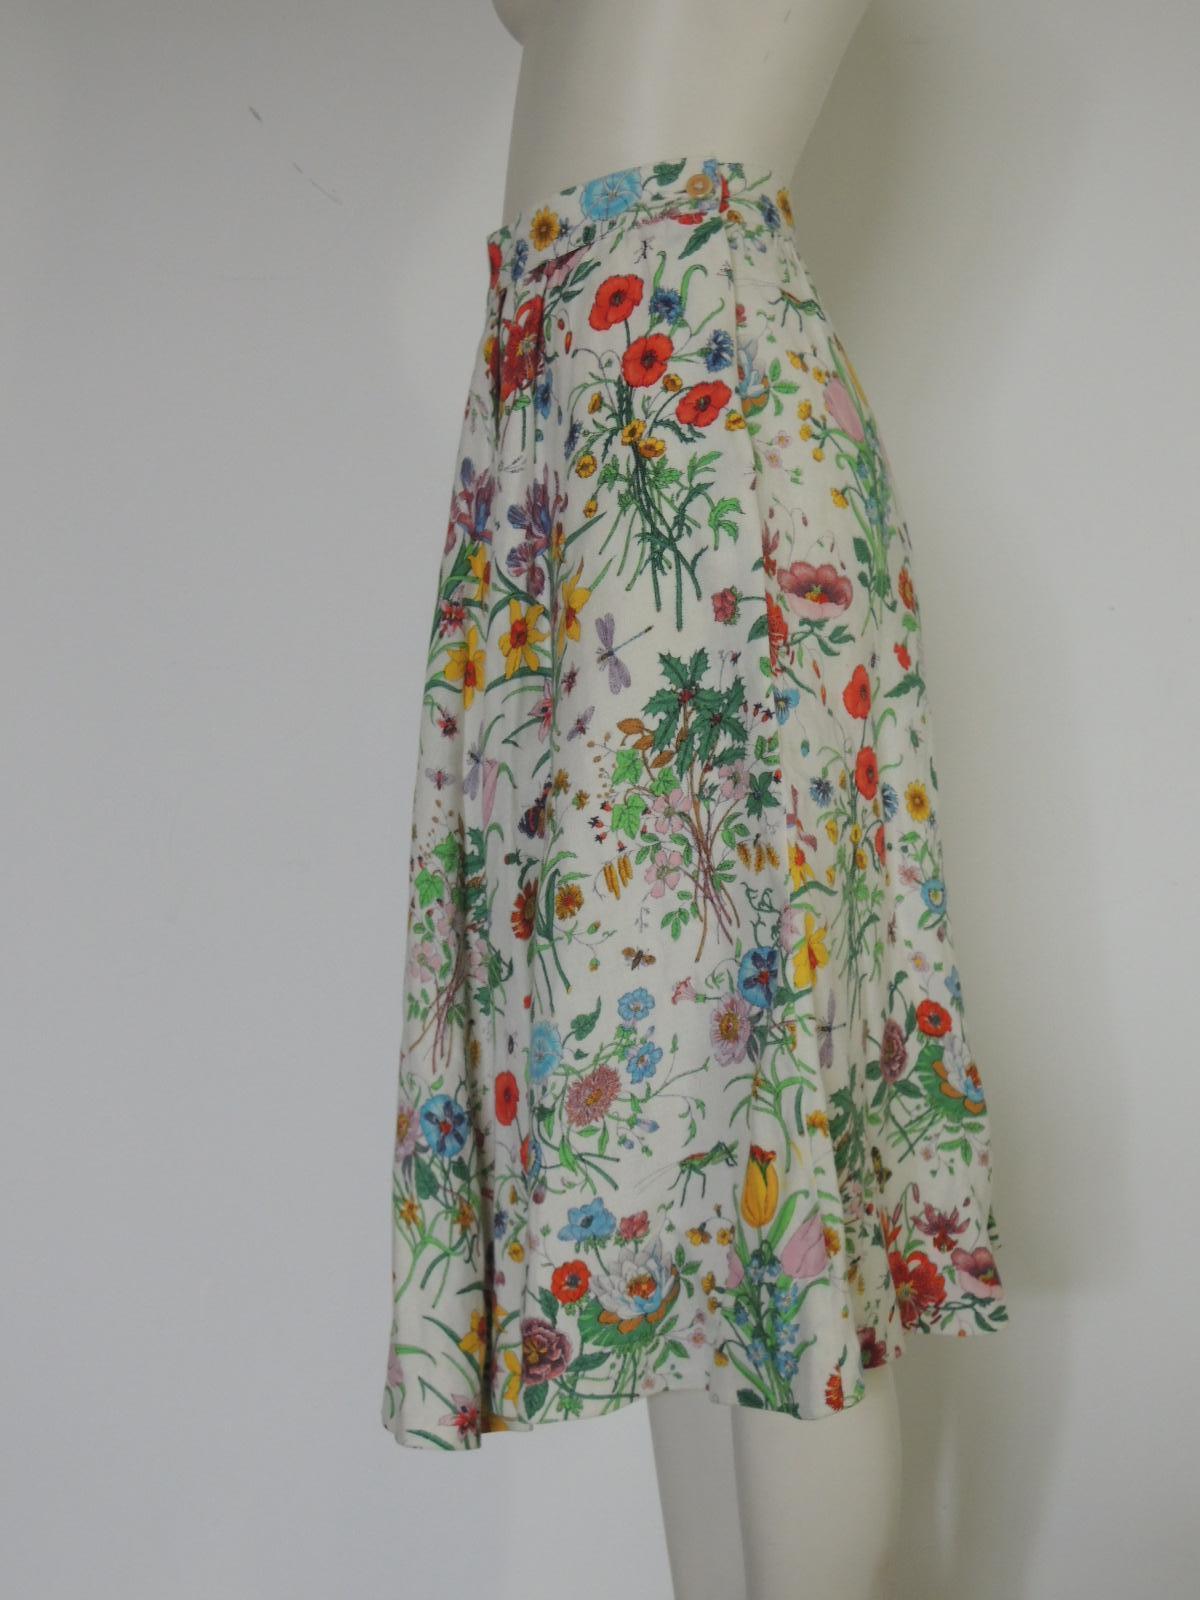 Vibrant vintage Gucci Flora print linen skirt.
Waist button and zipper closure.
Not lined.

No condition issues to speak of. This is a vintage skirt, it has been worn, but is in good vintage condition.

Tagged a size 40. Made in Italy

Waist: 12